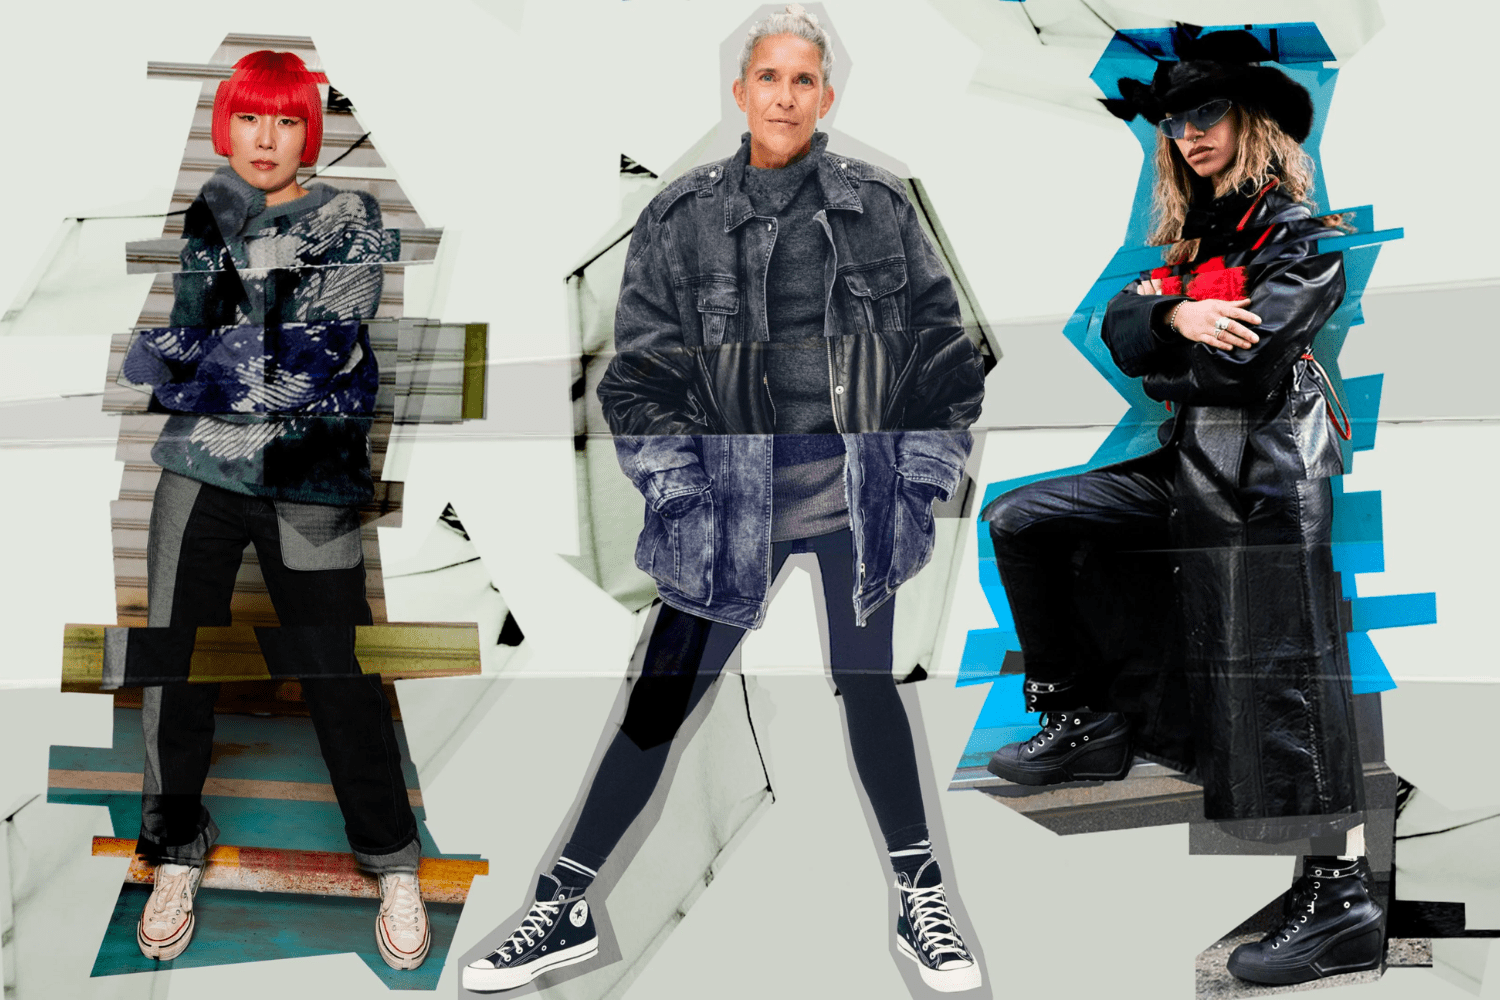 Converse presents a new campaign with unique designers giving the Chuck 70 model new DNA